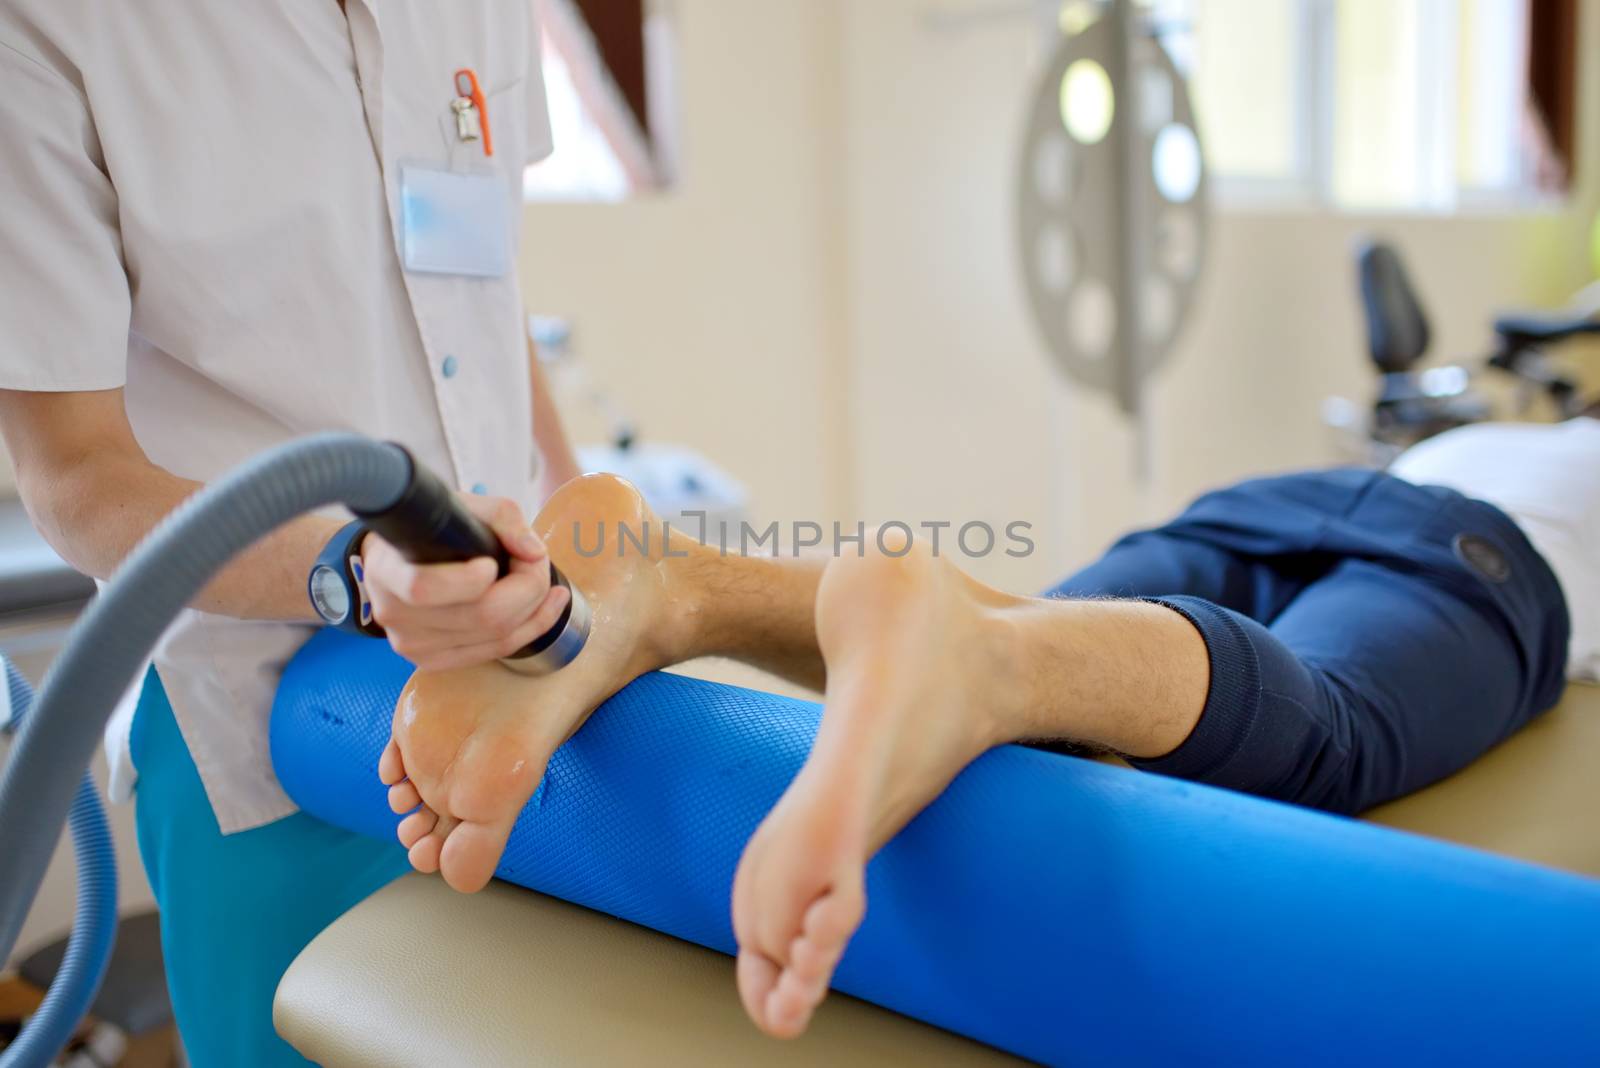 Ultrasound therapy treatment and rehabilitation